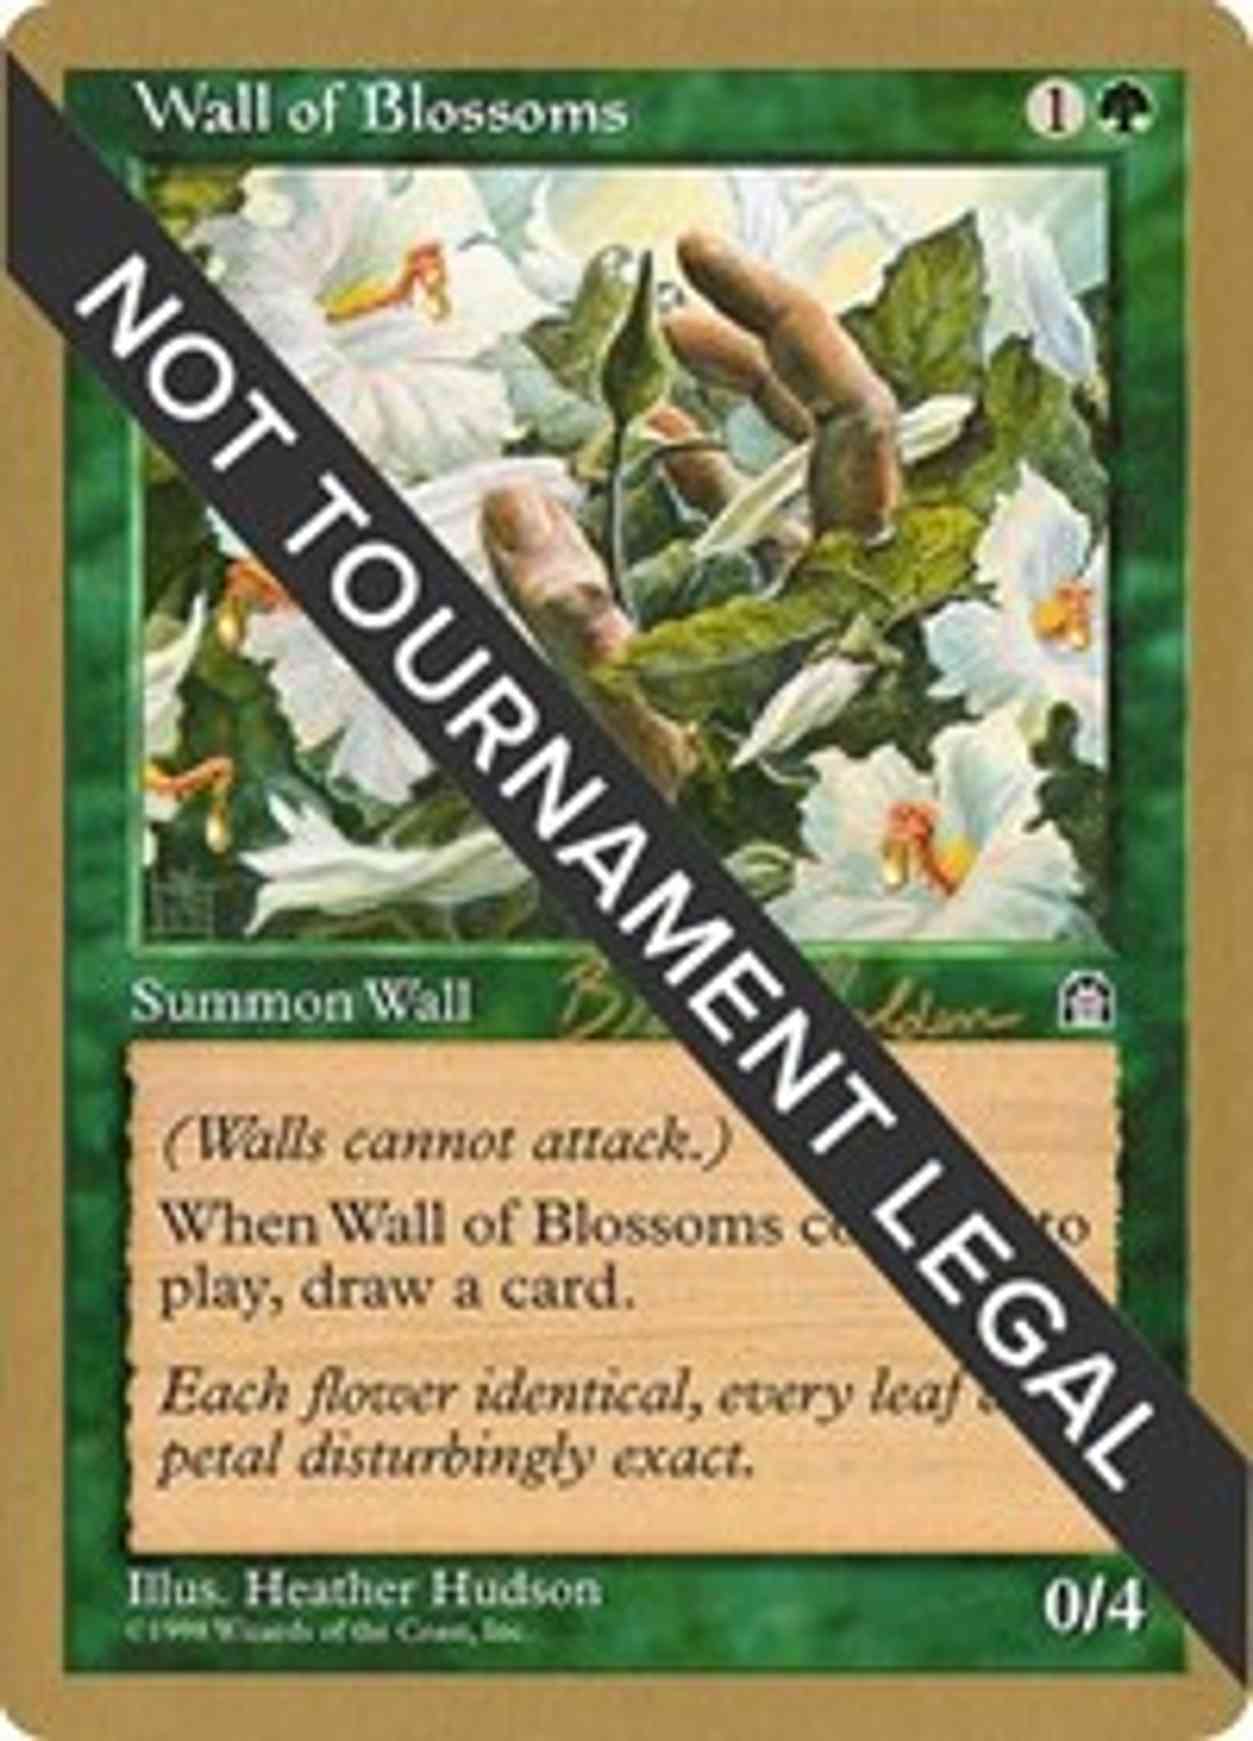 Wall of Blossoms - 1998 Brian Selden (STH) magic card front